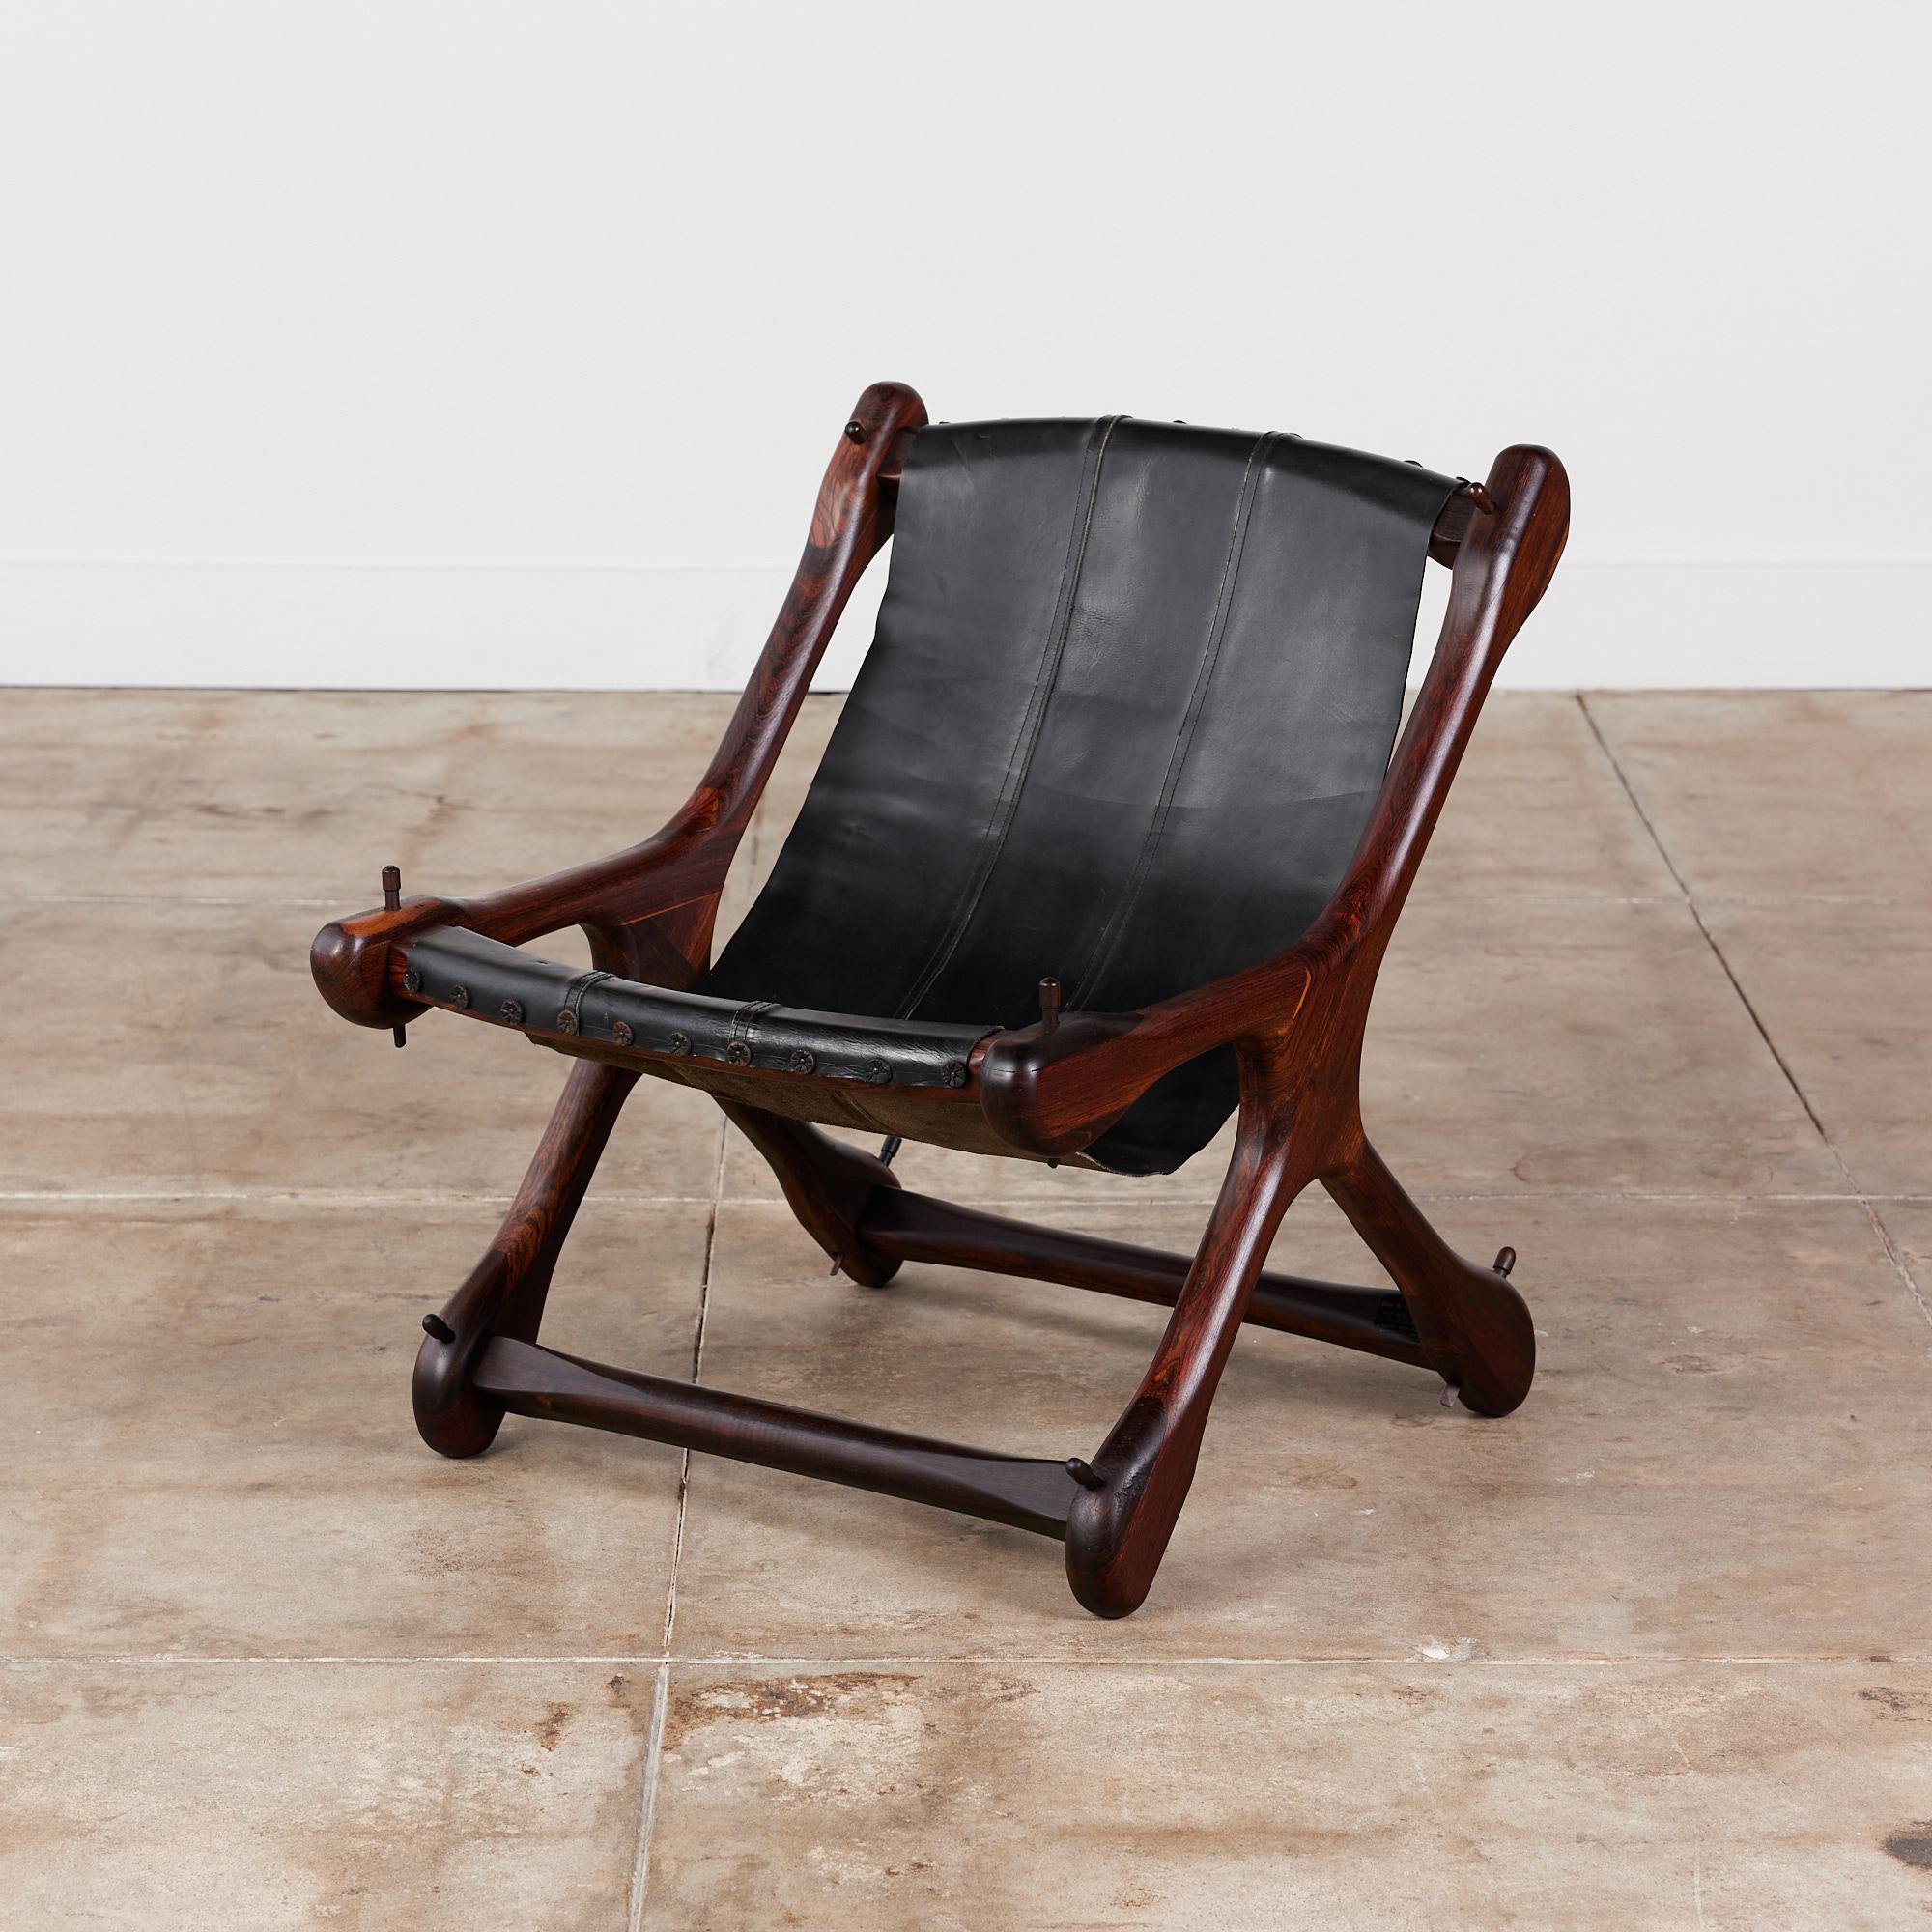 Leather lounge chair by Don Shoemaker for Señal, circa 1960s, Mexico. The chair features a rosewood frame and original patinated black leather hide. Leather button and nail details line the front seat of the chair and top of the backrest where the